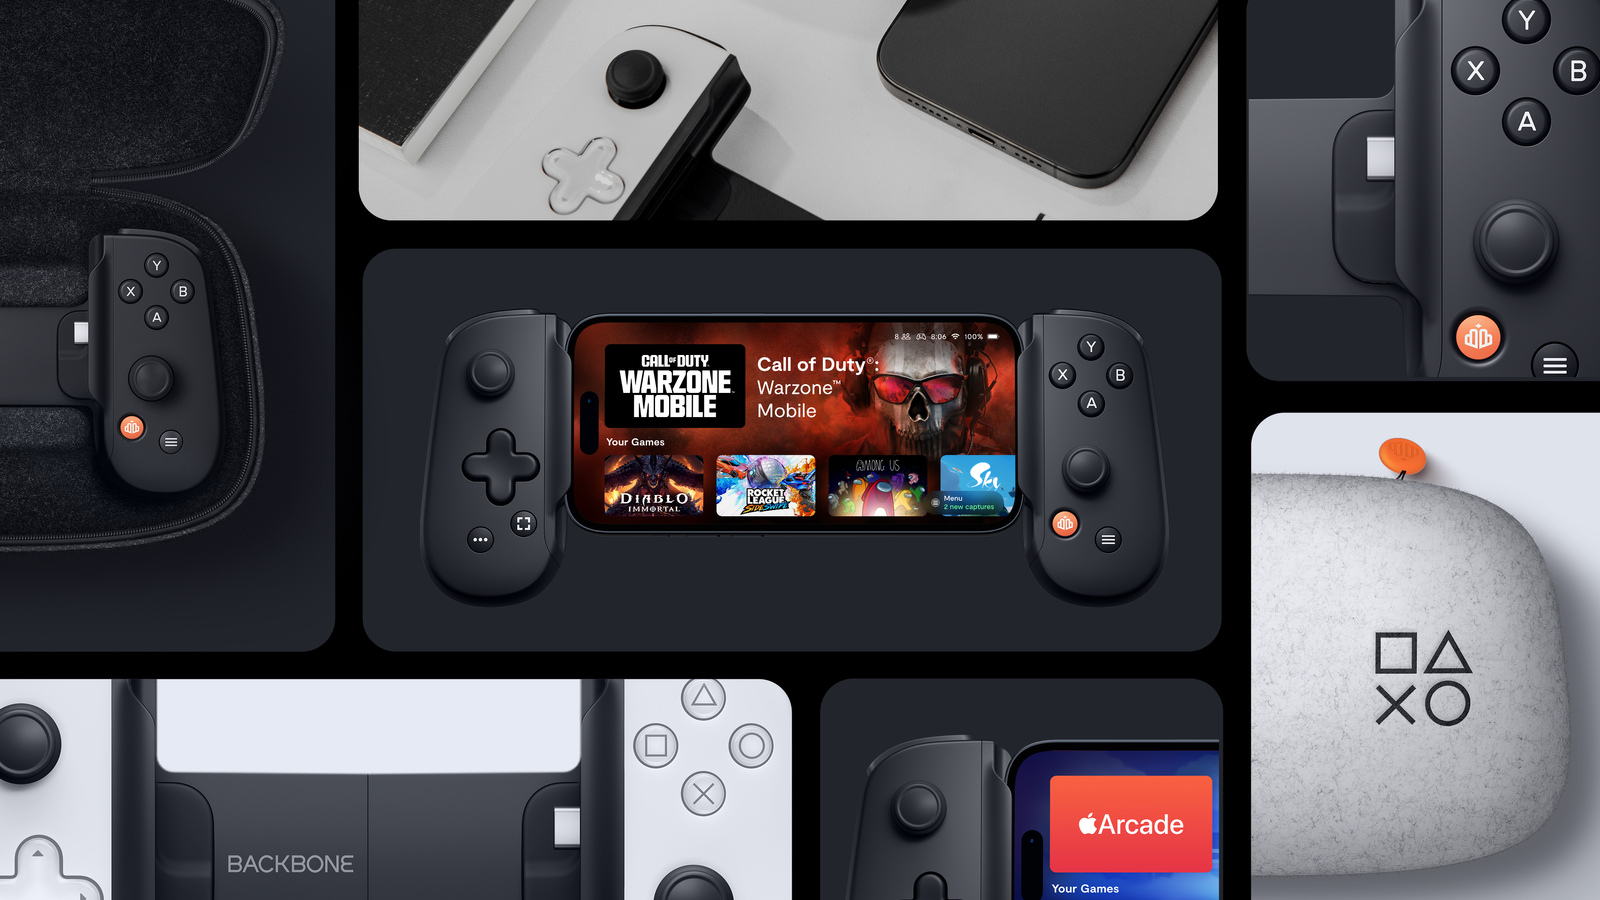 Netflix launched a game controller app on Apple's App Store - The